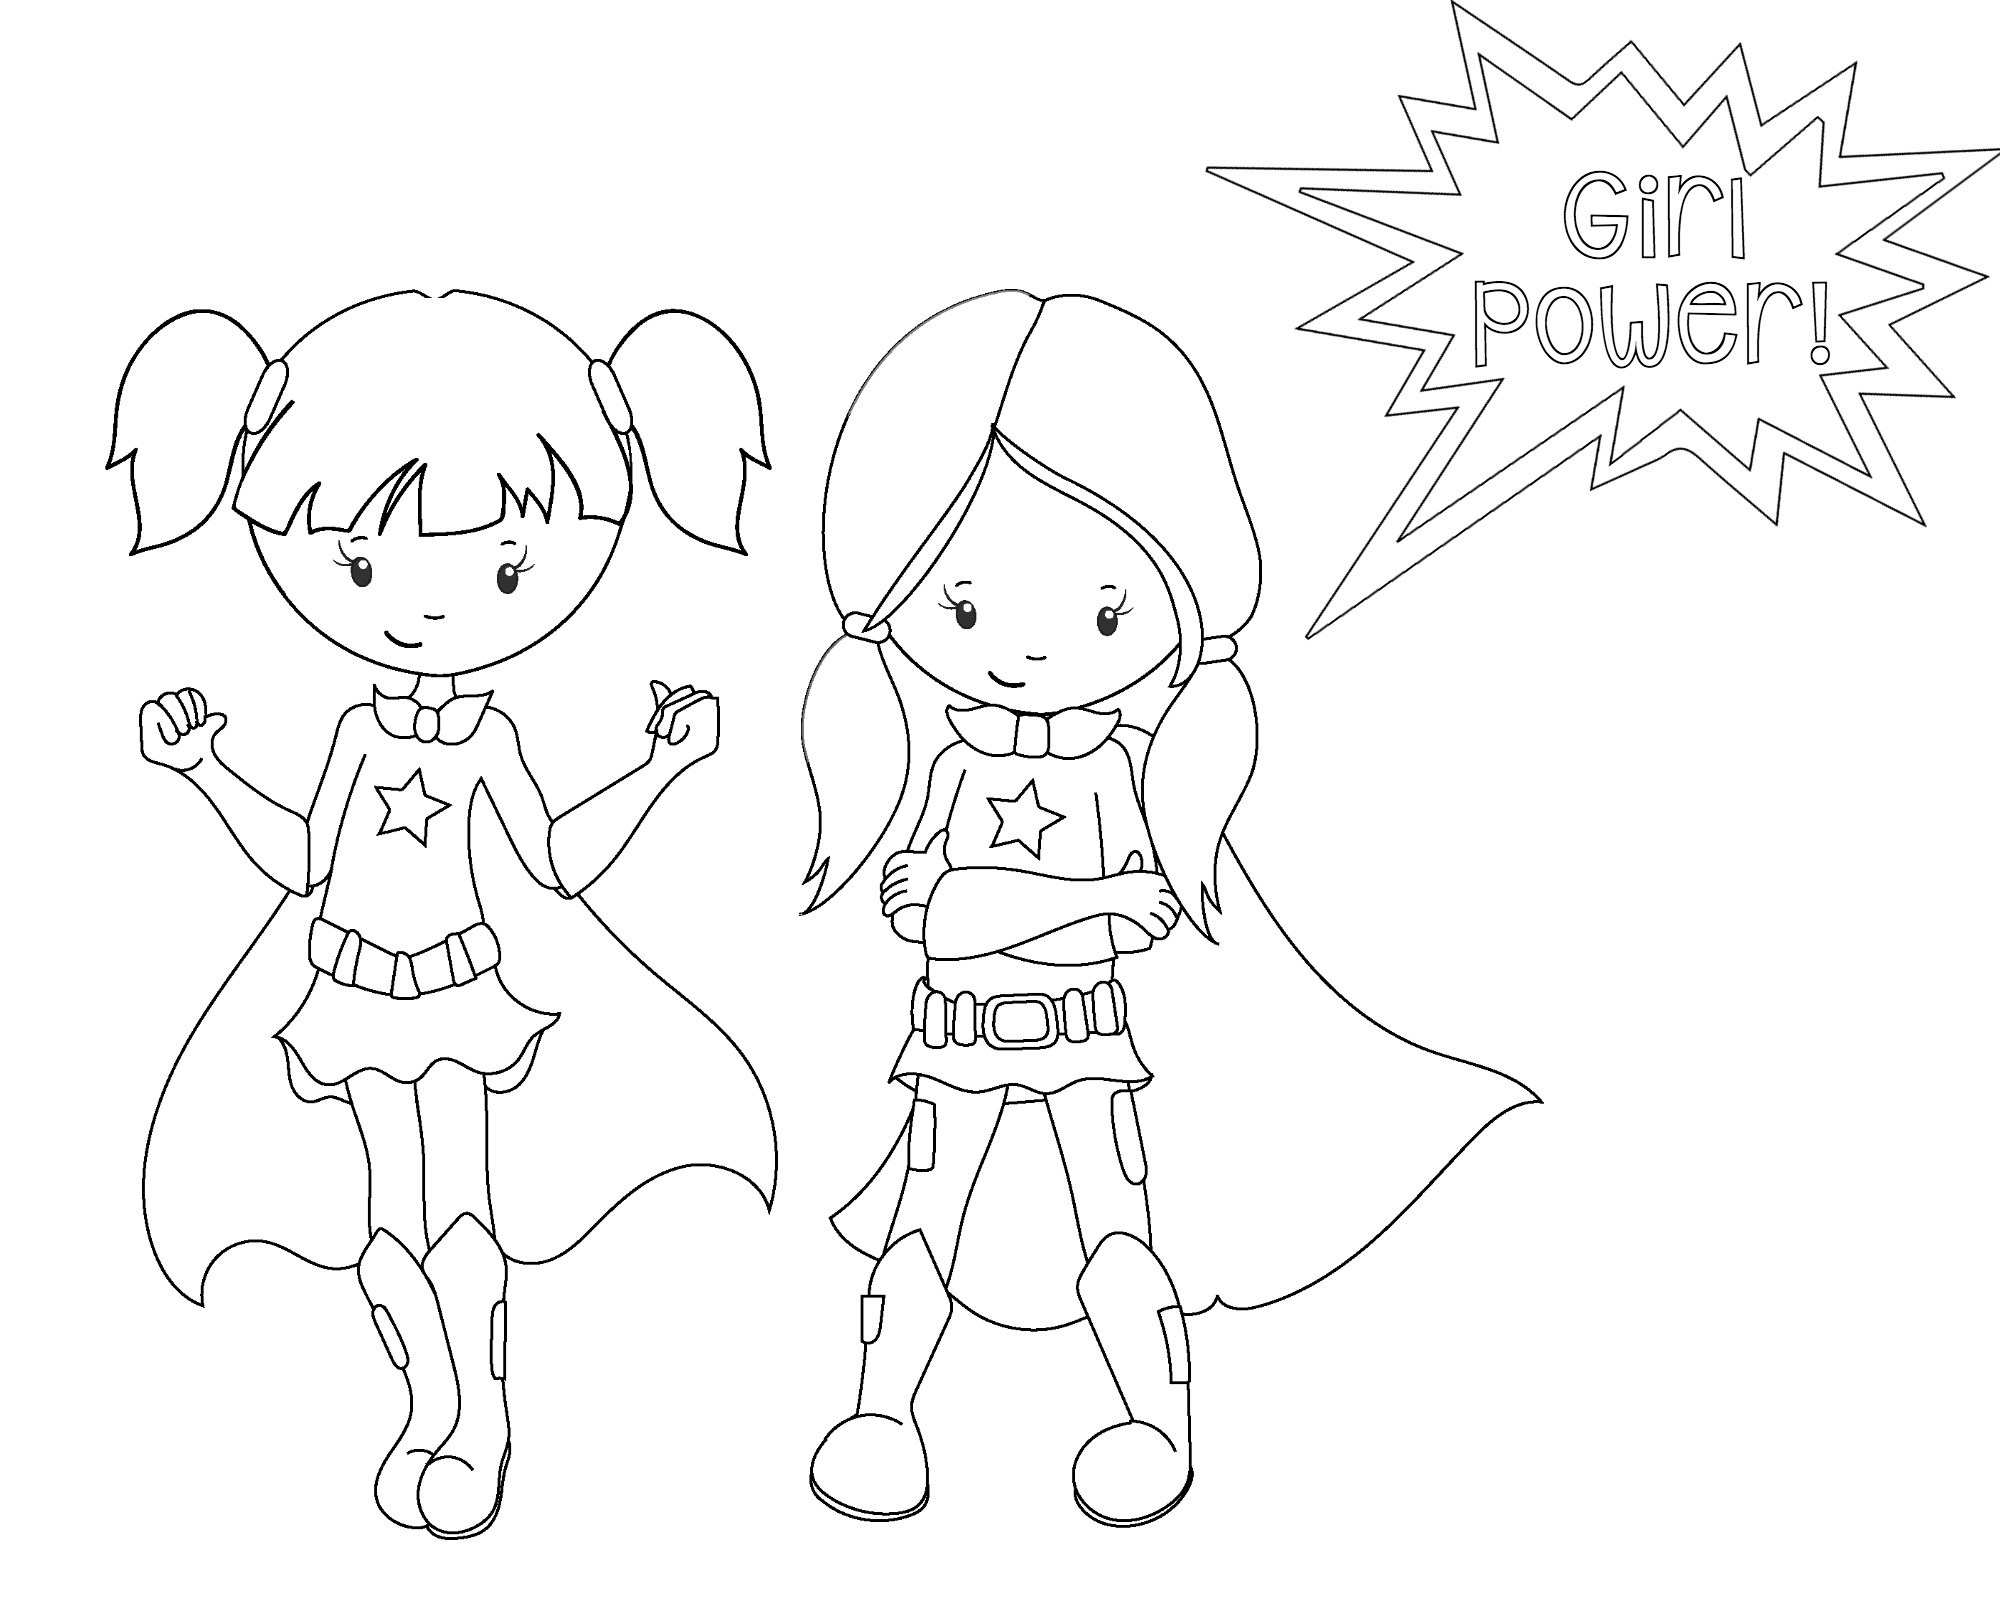 Free Printable Superhero Coloring Sheets For Kids - Crazy Little - Free Printable Superhero Coloring Pages